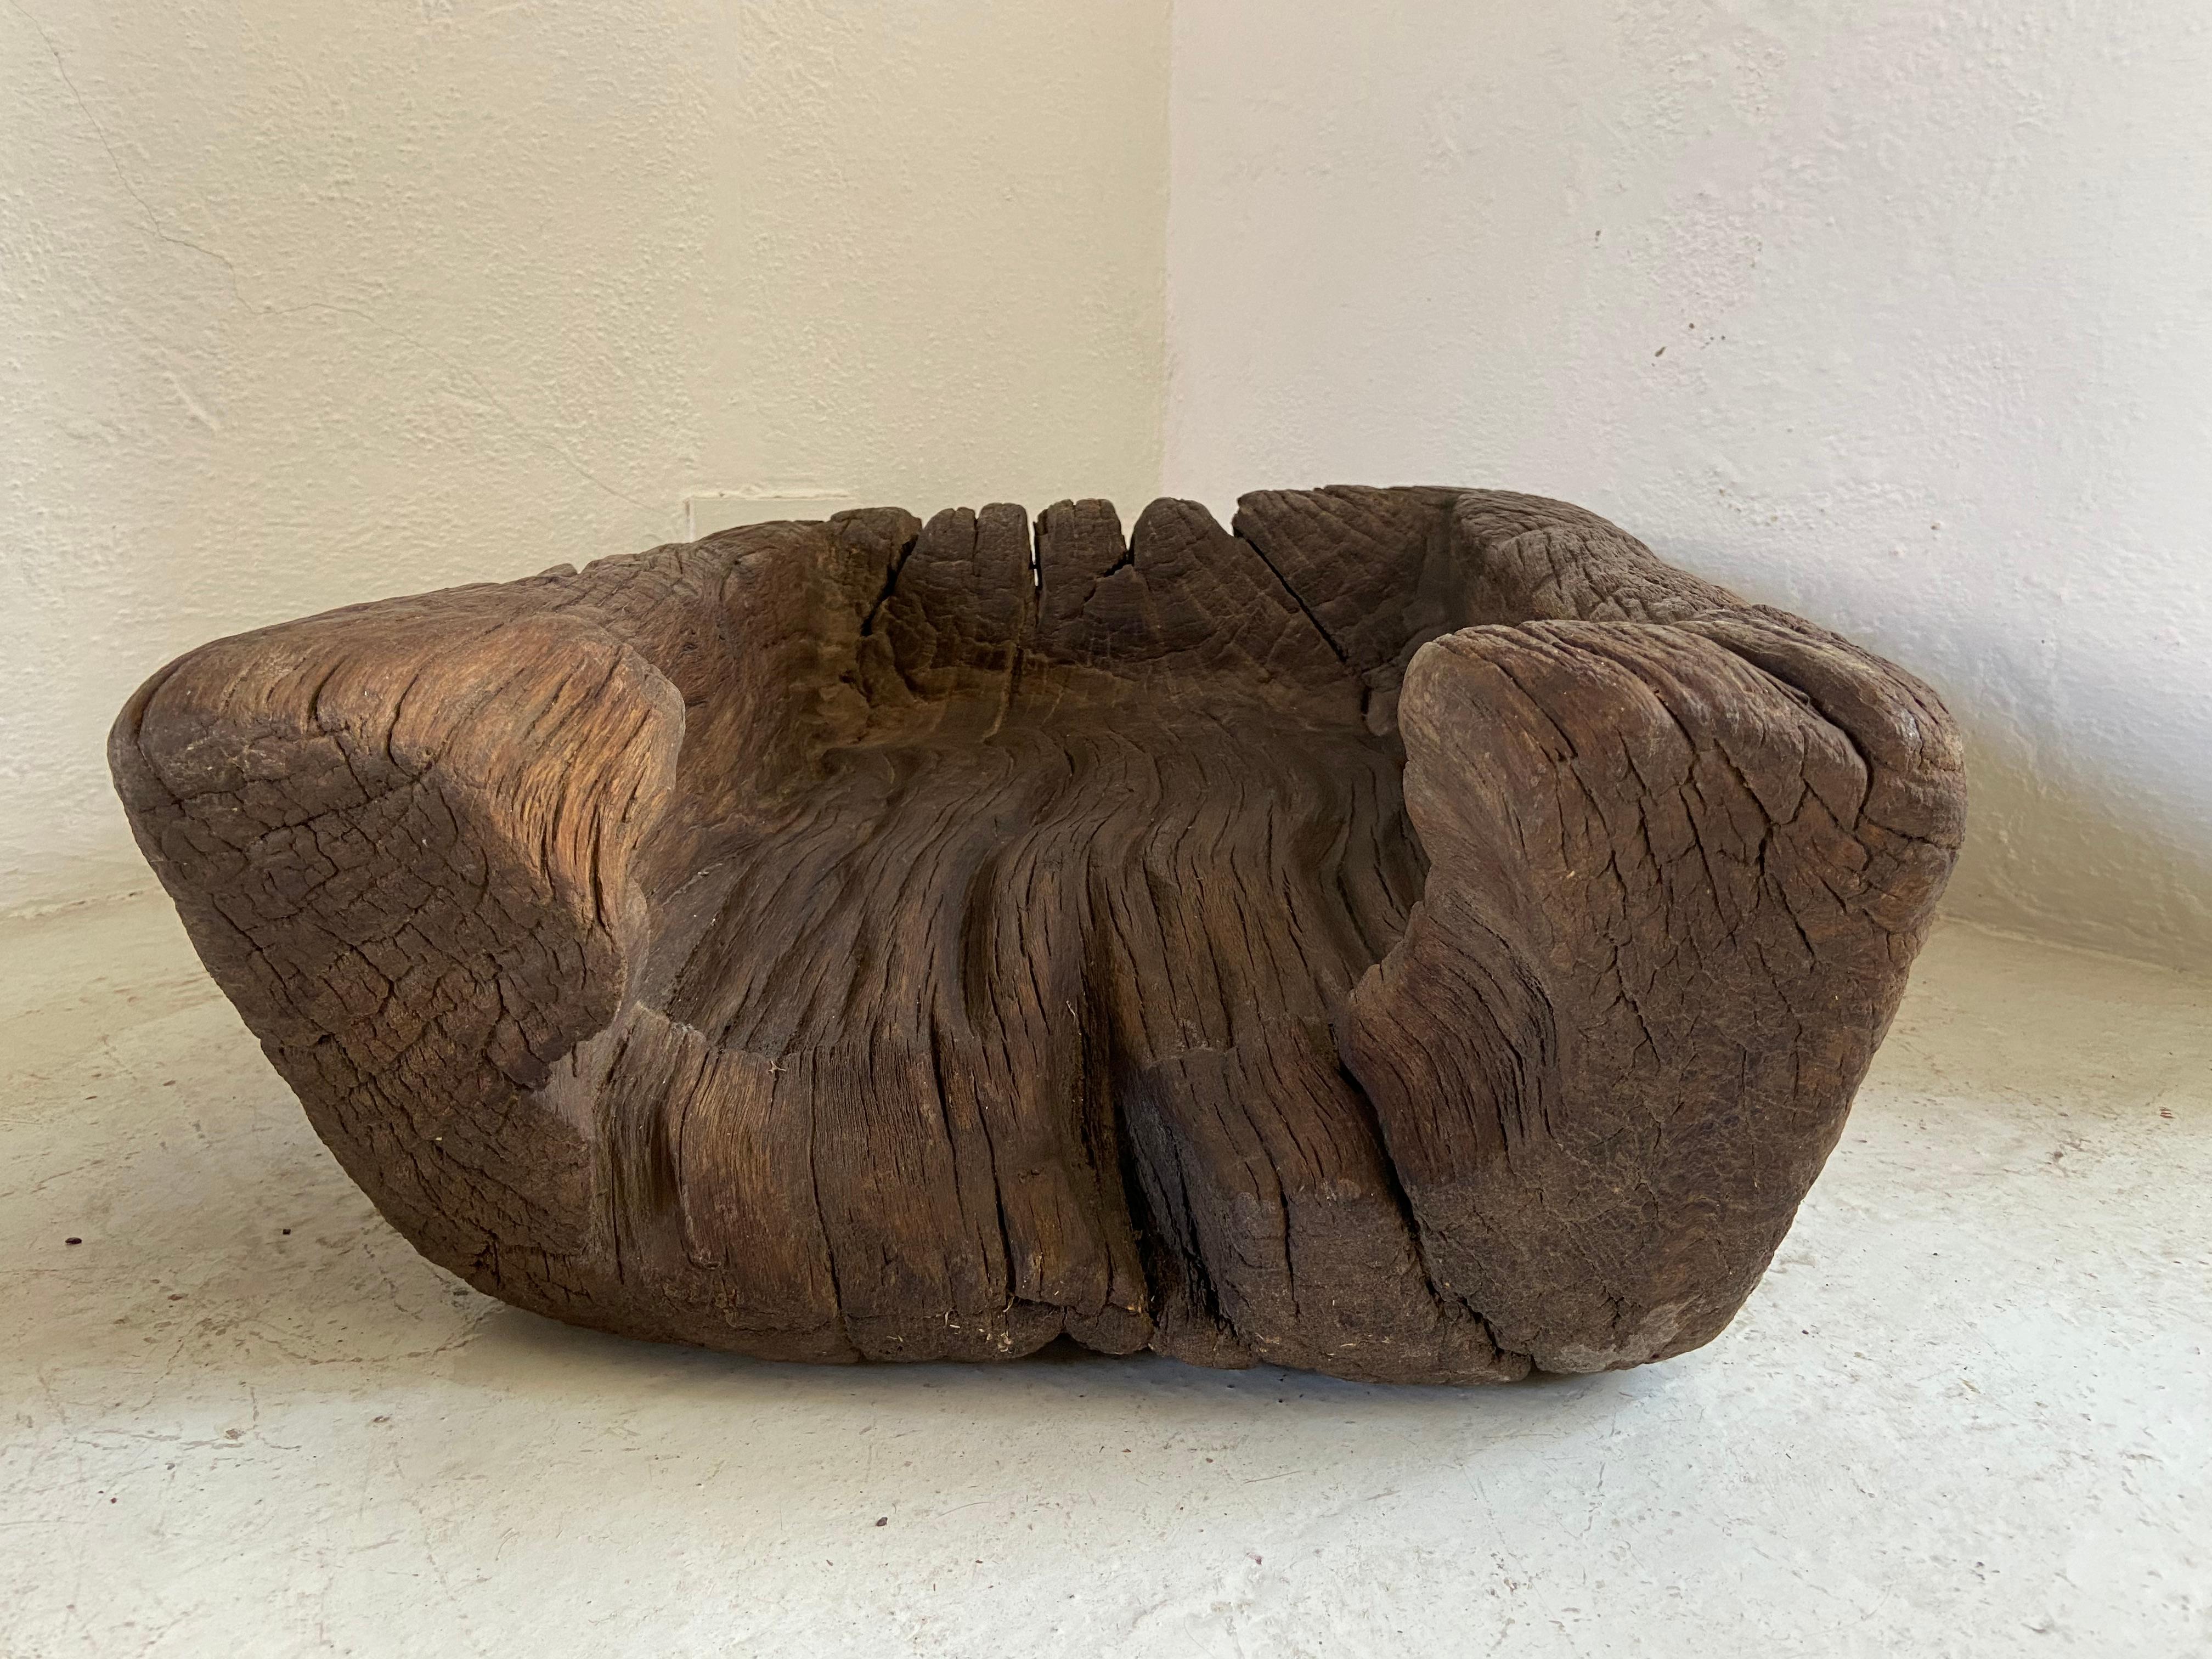 Mesquite basin trough from San Felipe, Guanajuato, circa late 1800's. Striations within the wood structure indicates a high degree of use. One of a kind piece never seen or acquired before.